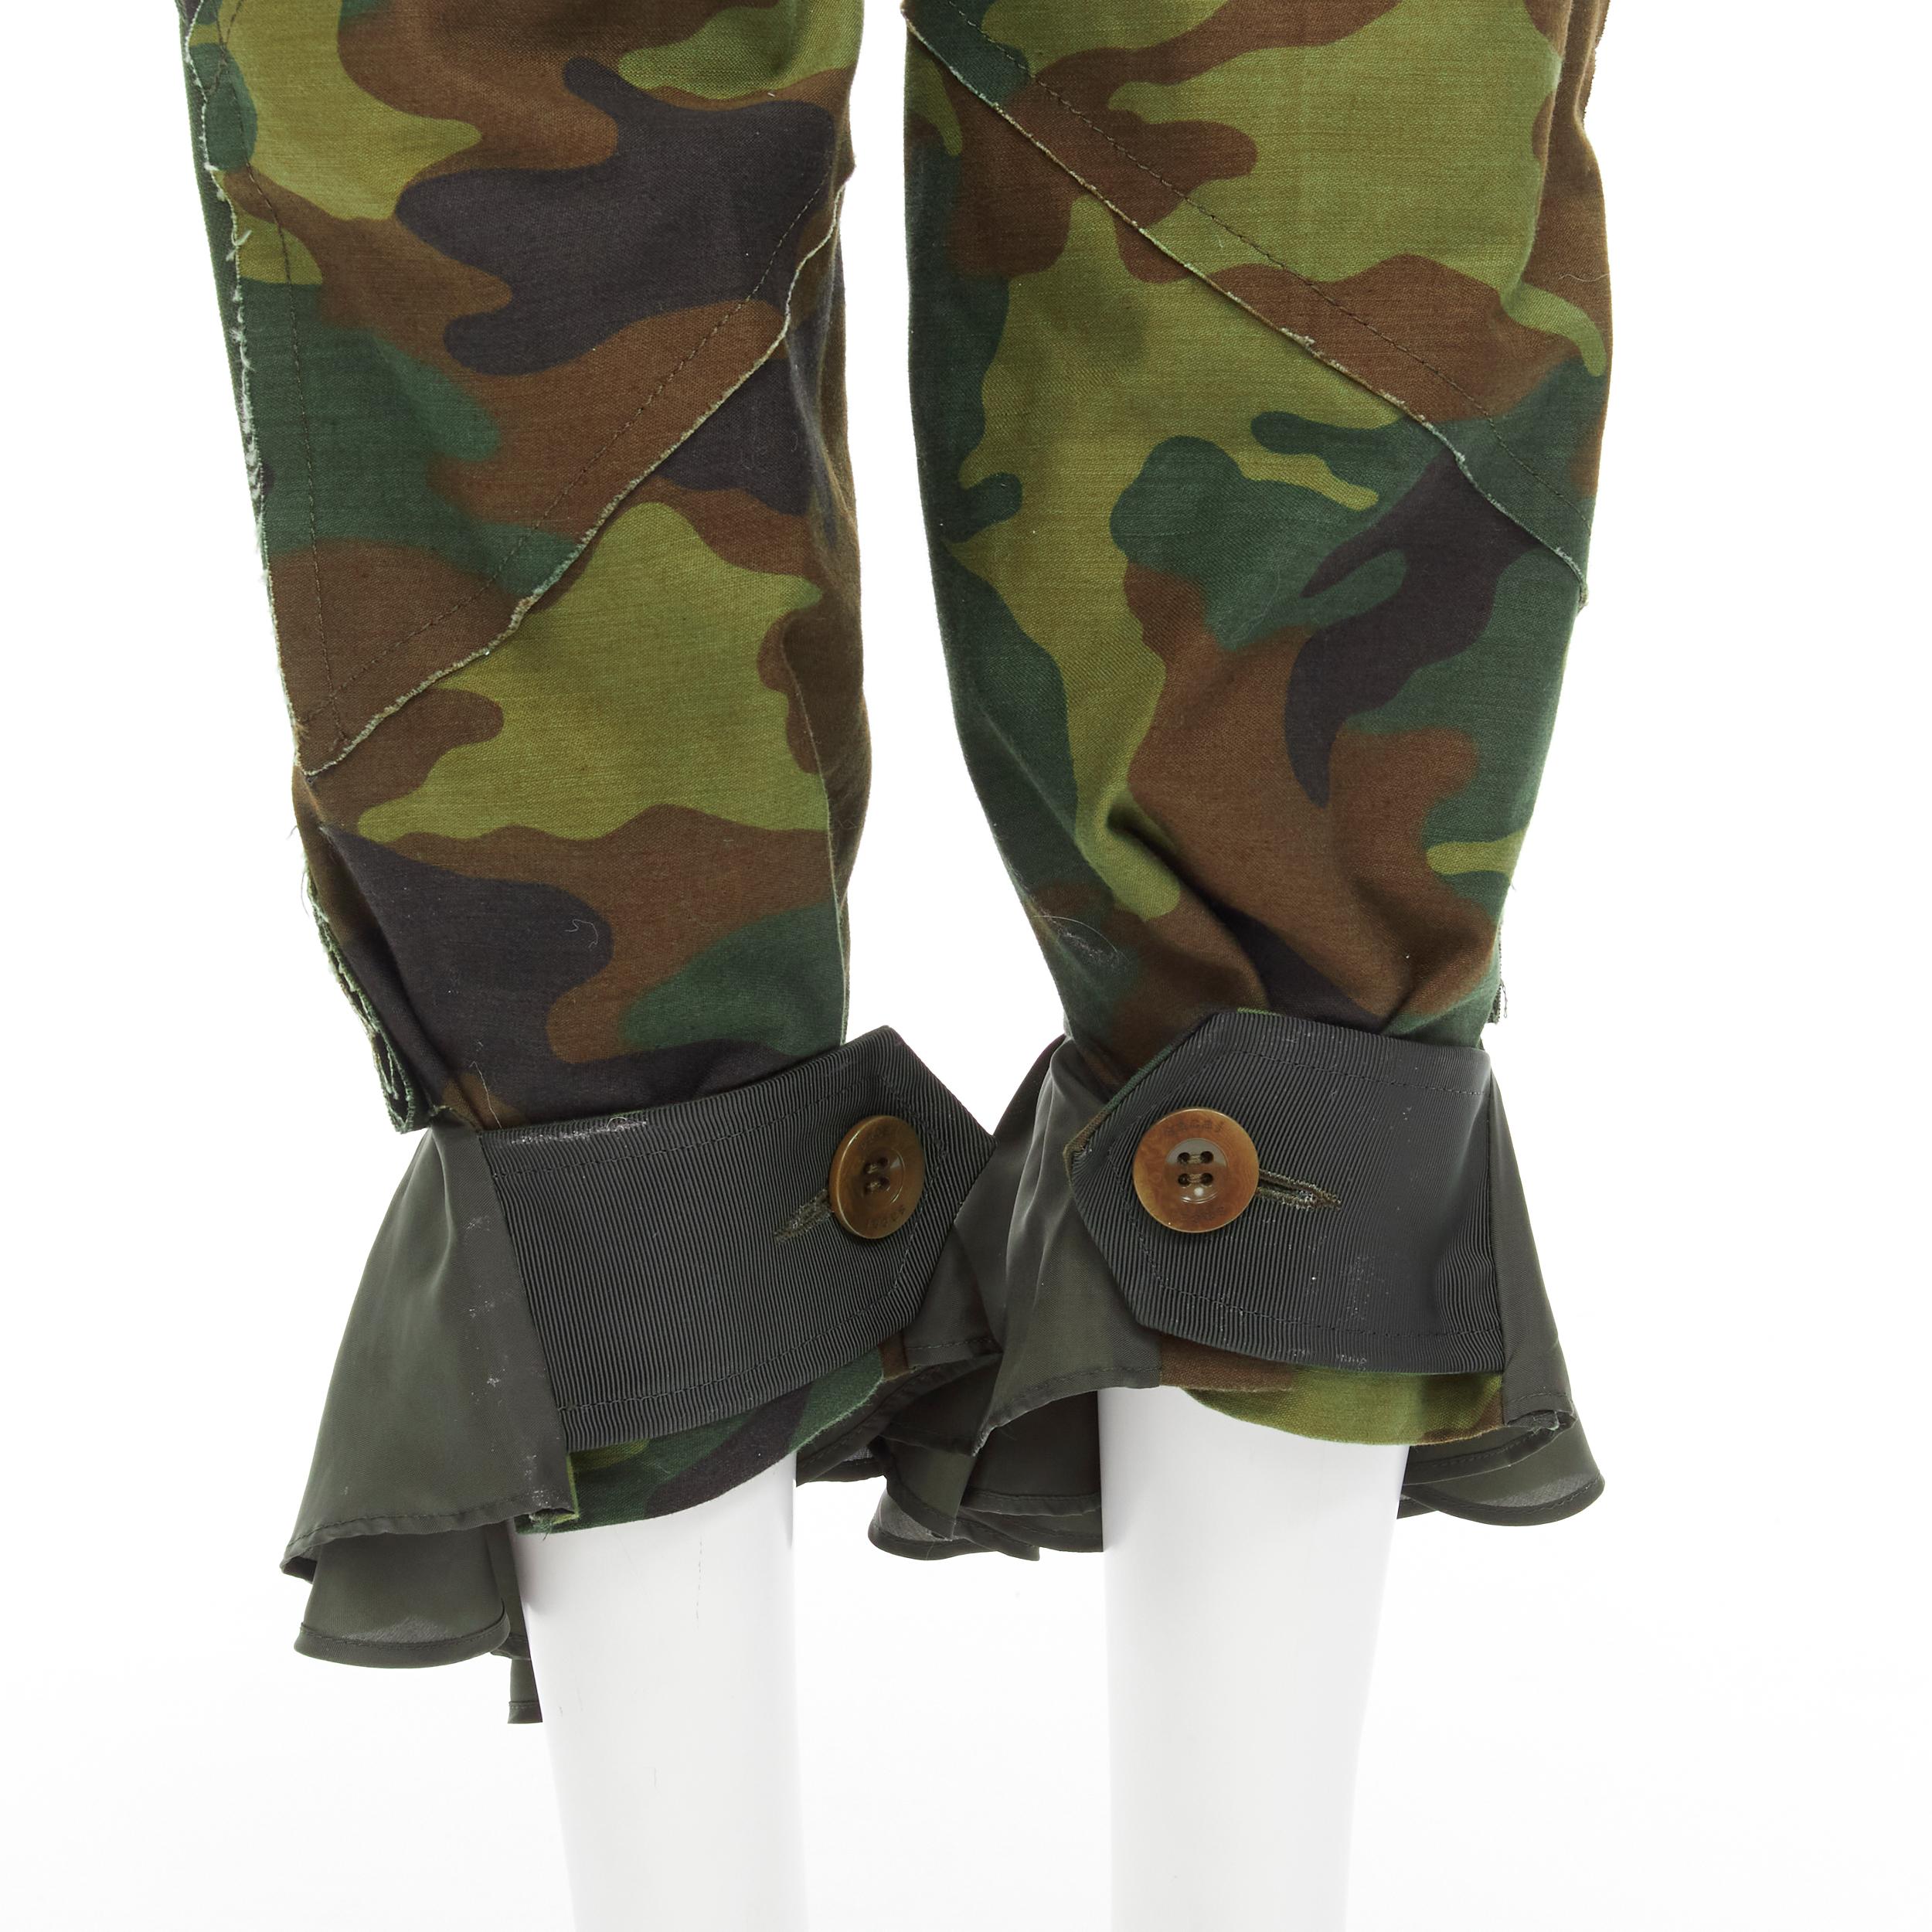 SACAI Chitose Abe green camouflage deconstructed patchwork flared hem pants S
Brand: Sacai
Designer: Chitose Abe
Material: Feels like cotton
Color: Green
Pattern: Camouflage
Closure: Zip
Extra Detail: Attached belt detail. Adjustable grosgrain tab